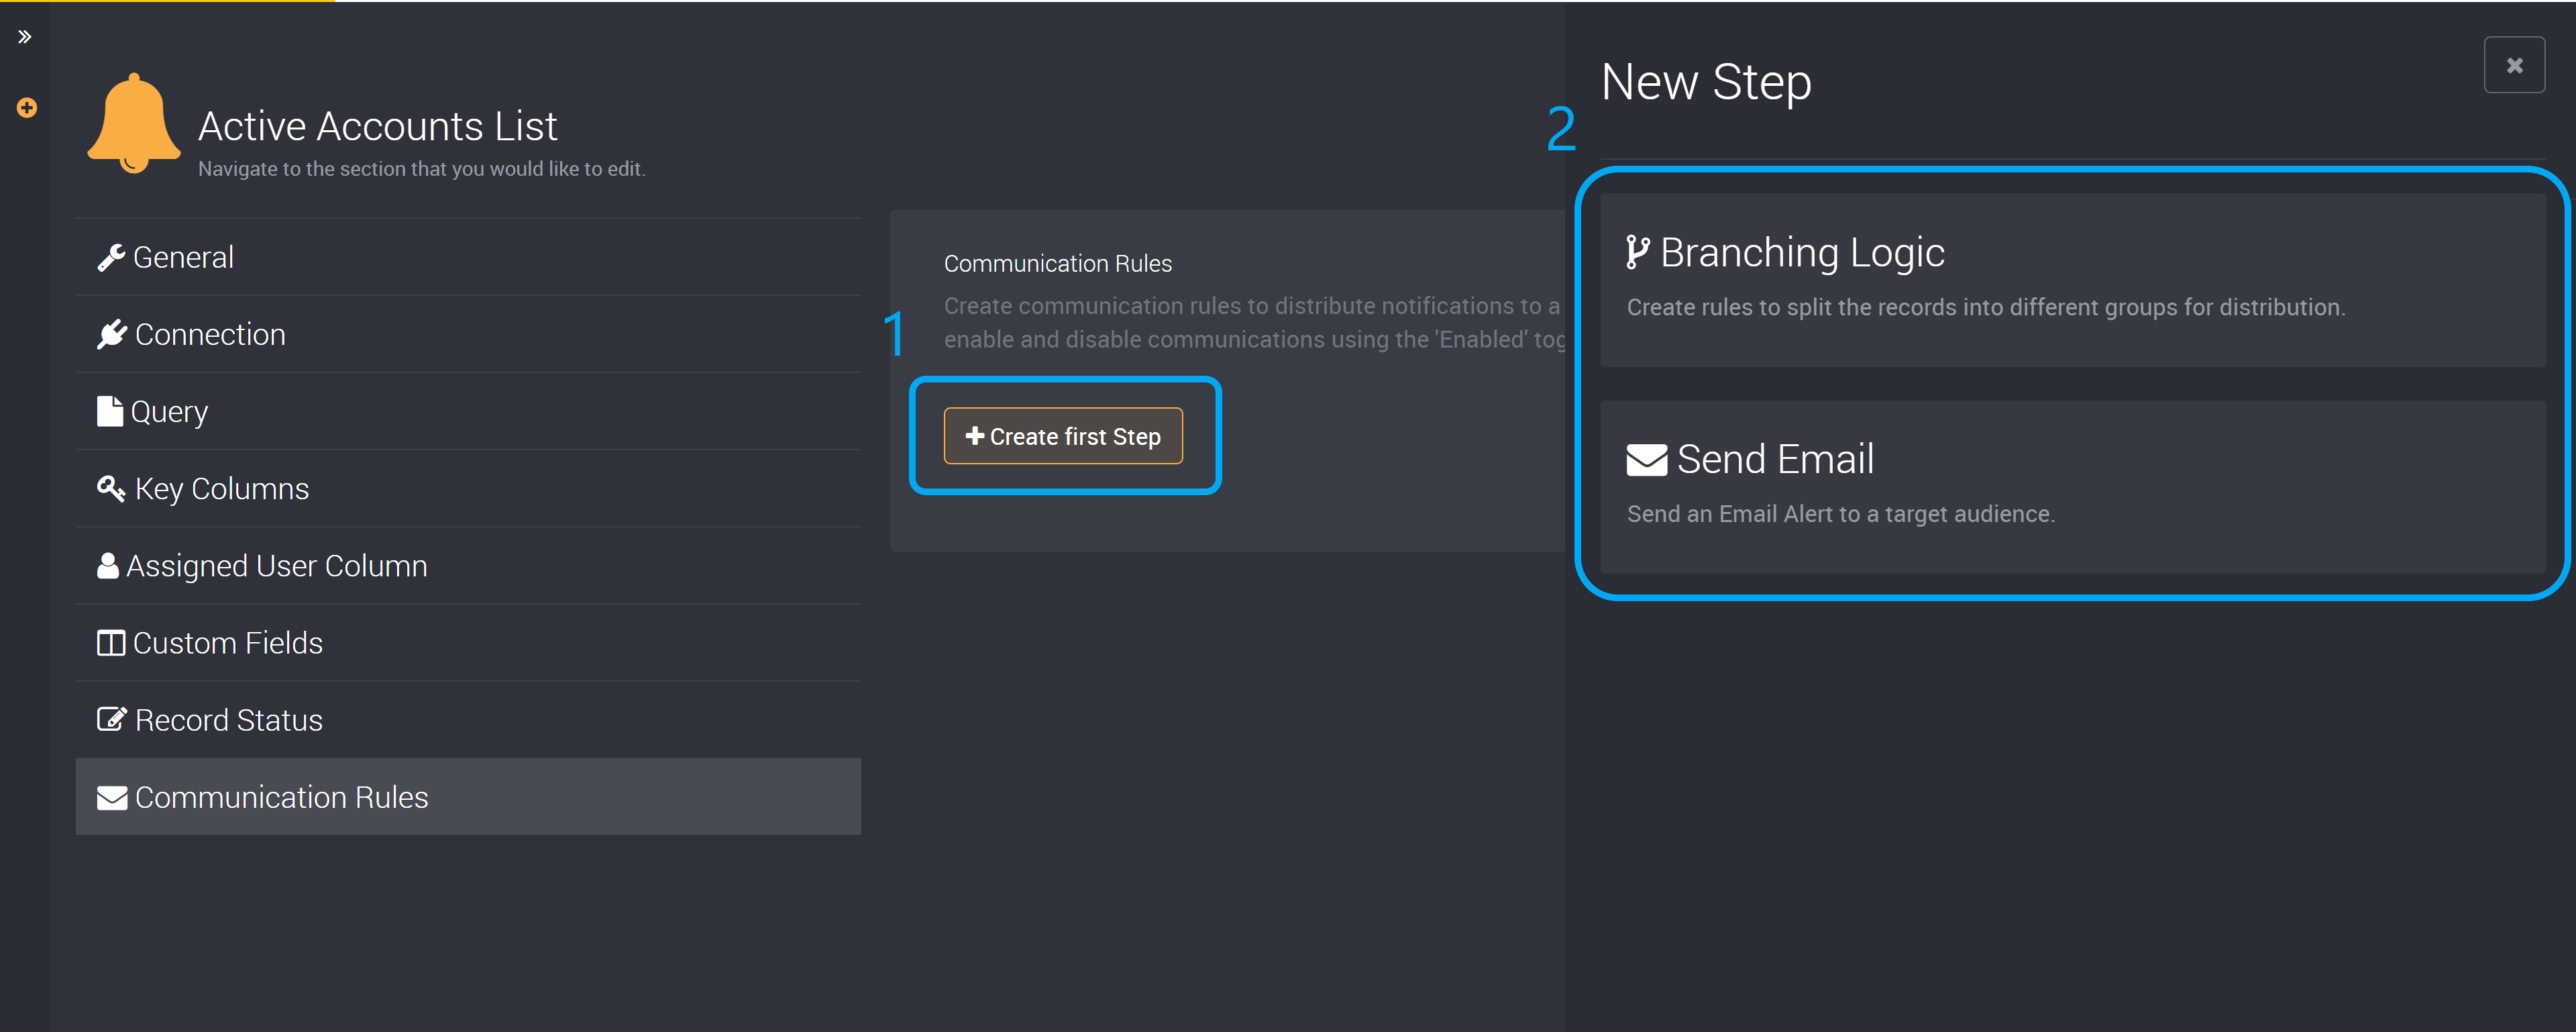 Choose either to add branching logic or send an email